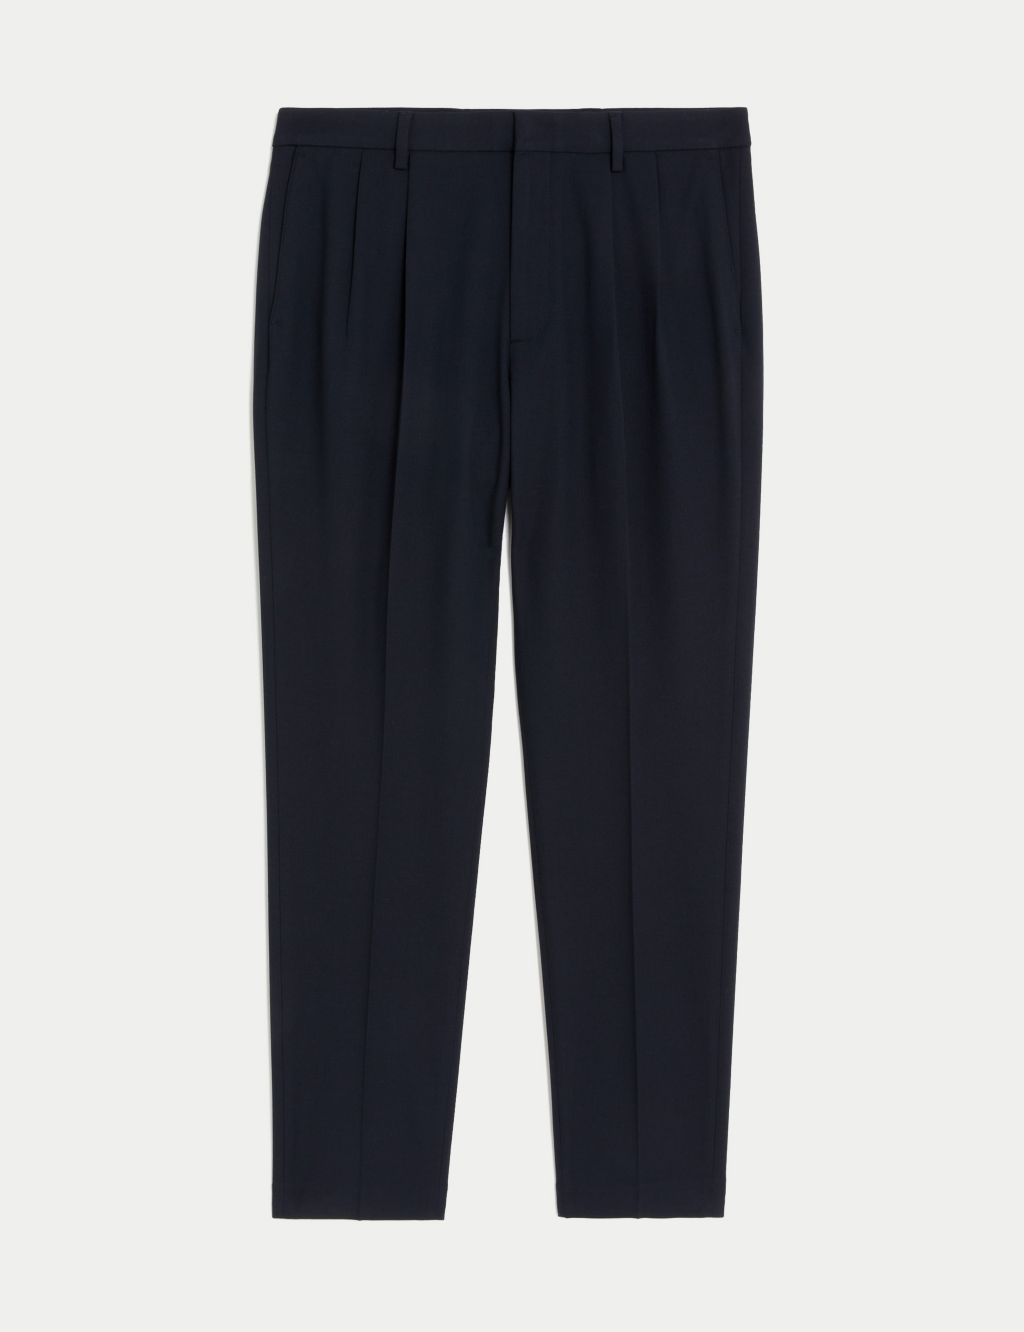 Twin Pleat Stretch Trousers image 6